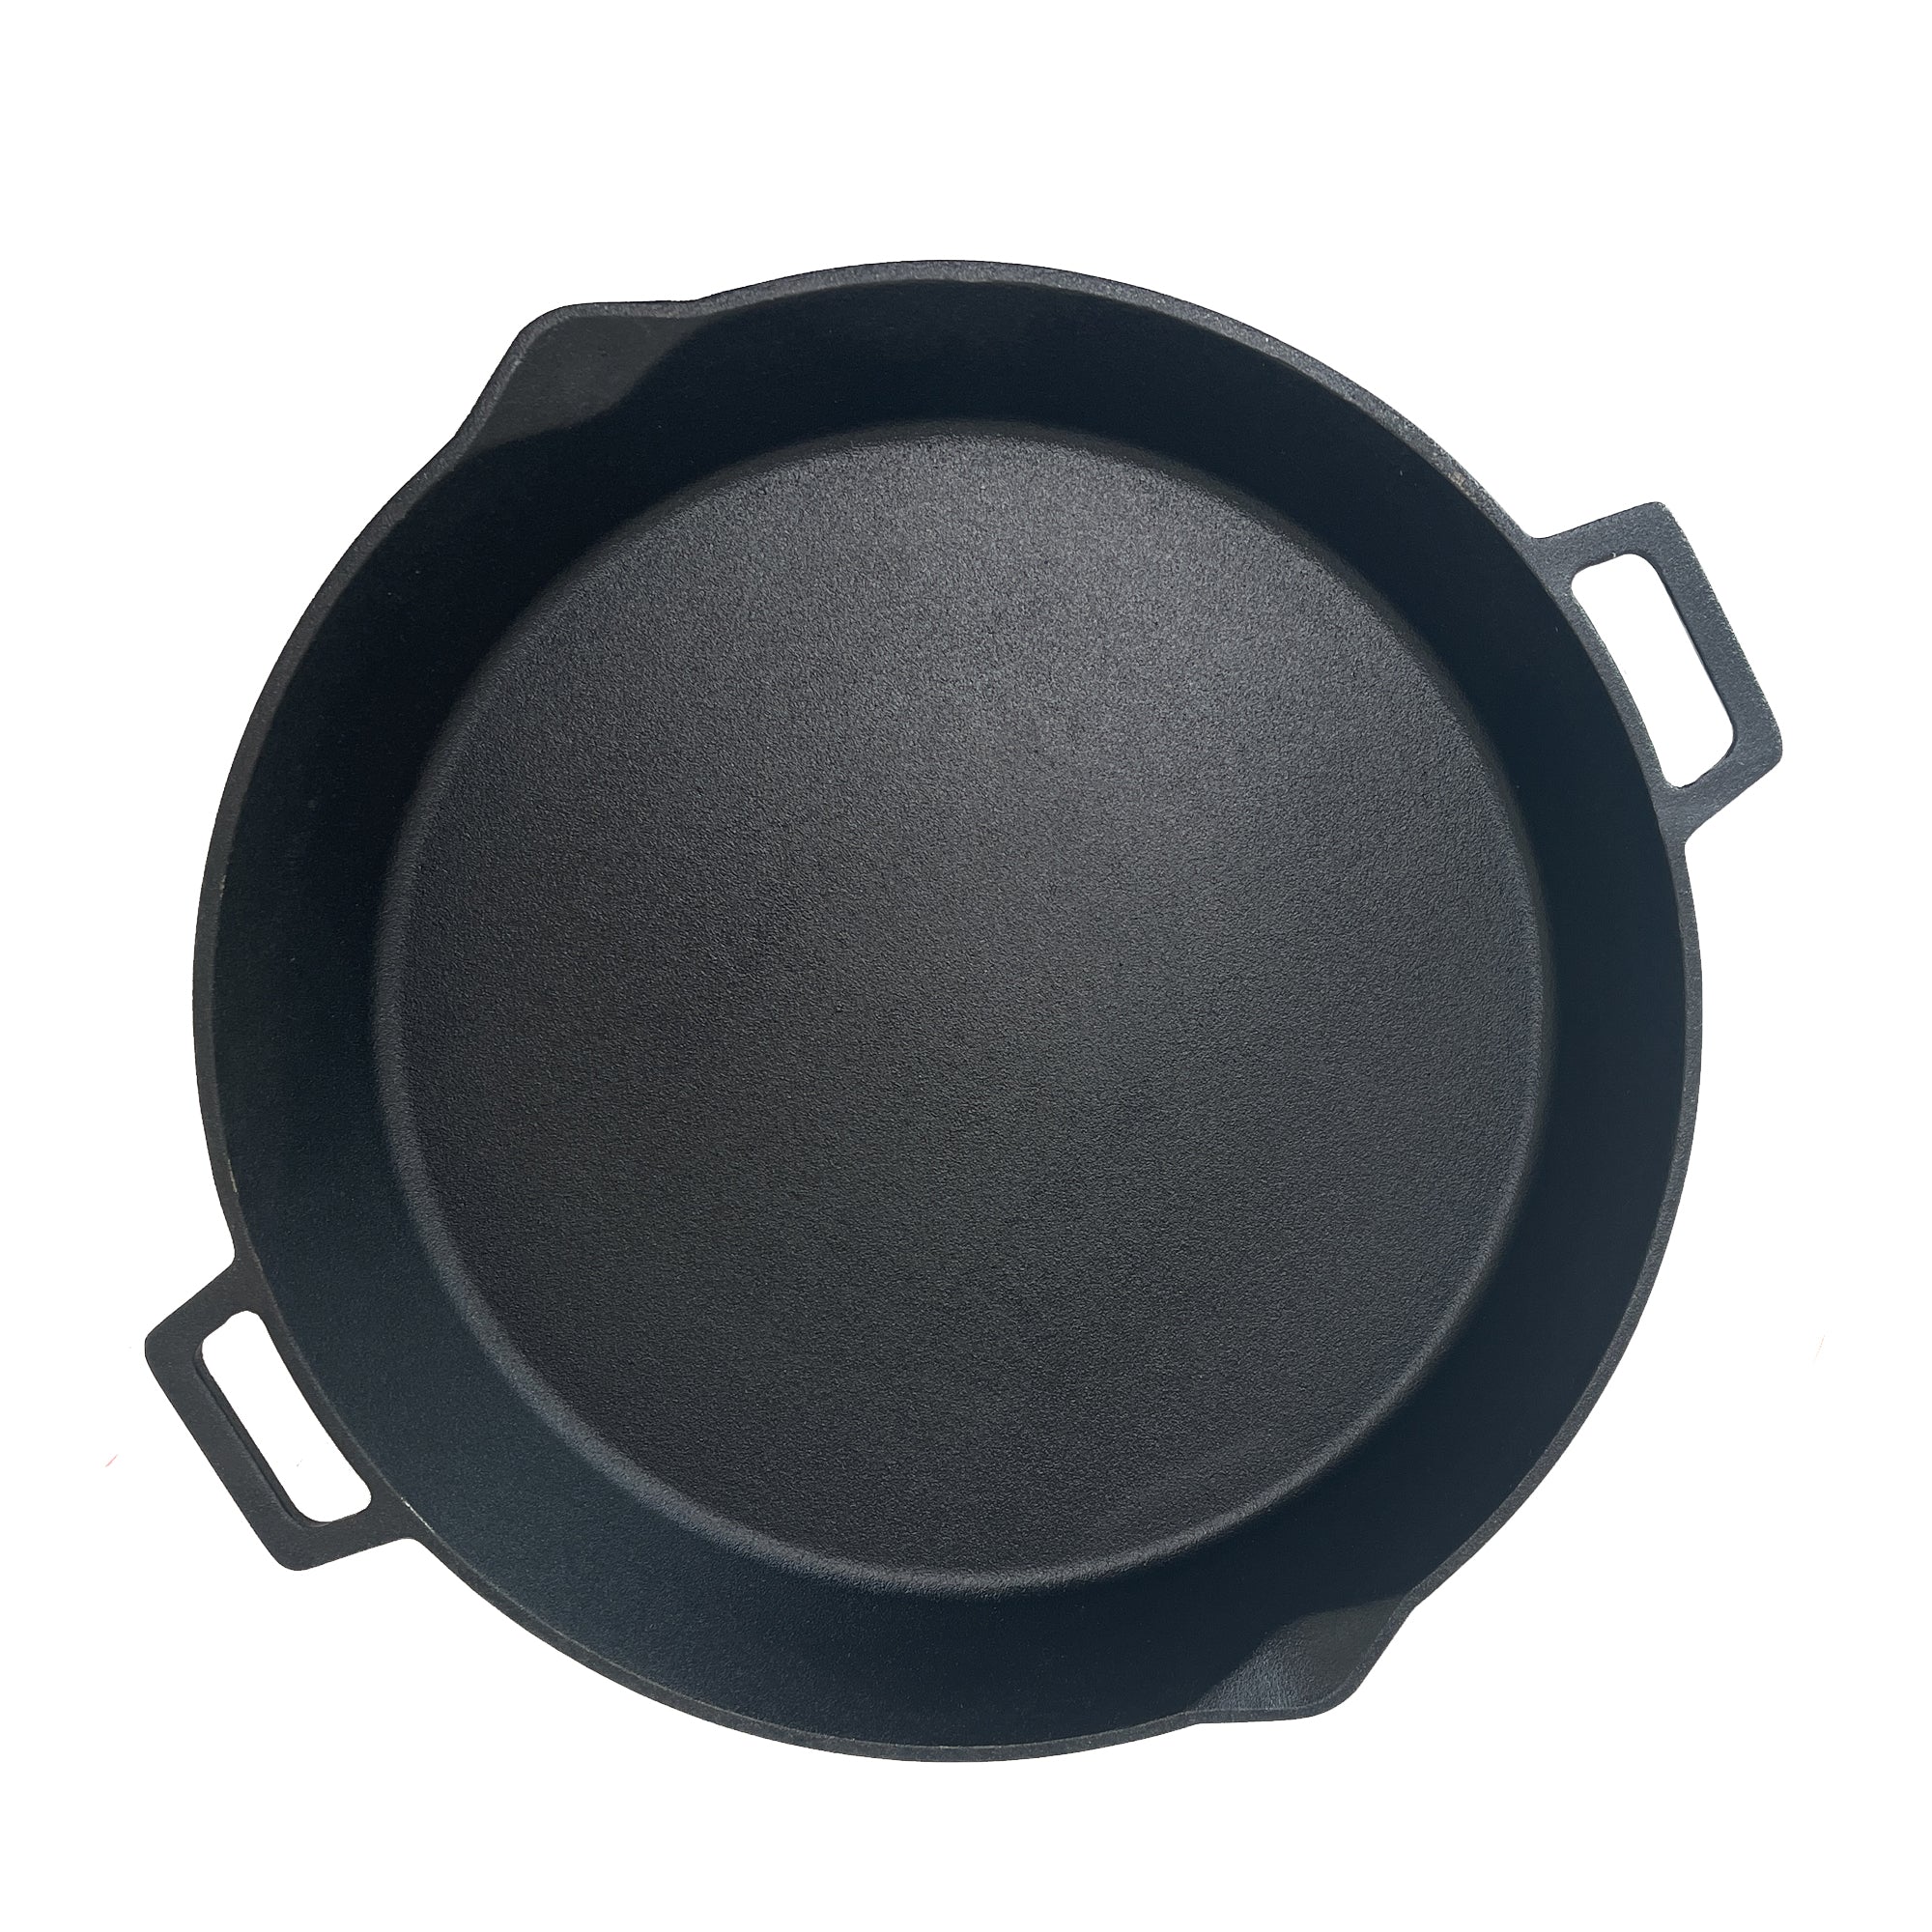 Lodge 17 Inch Cast Iron Dual Handle Skillet Black Oven Safe Dual Handle Pan